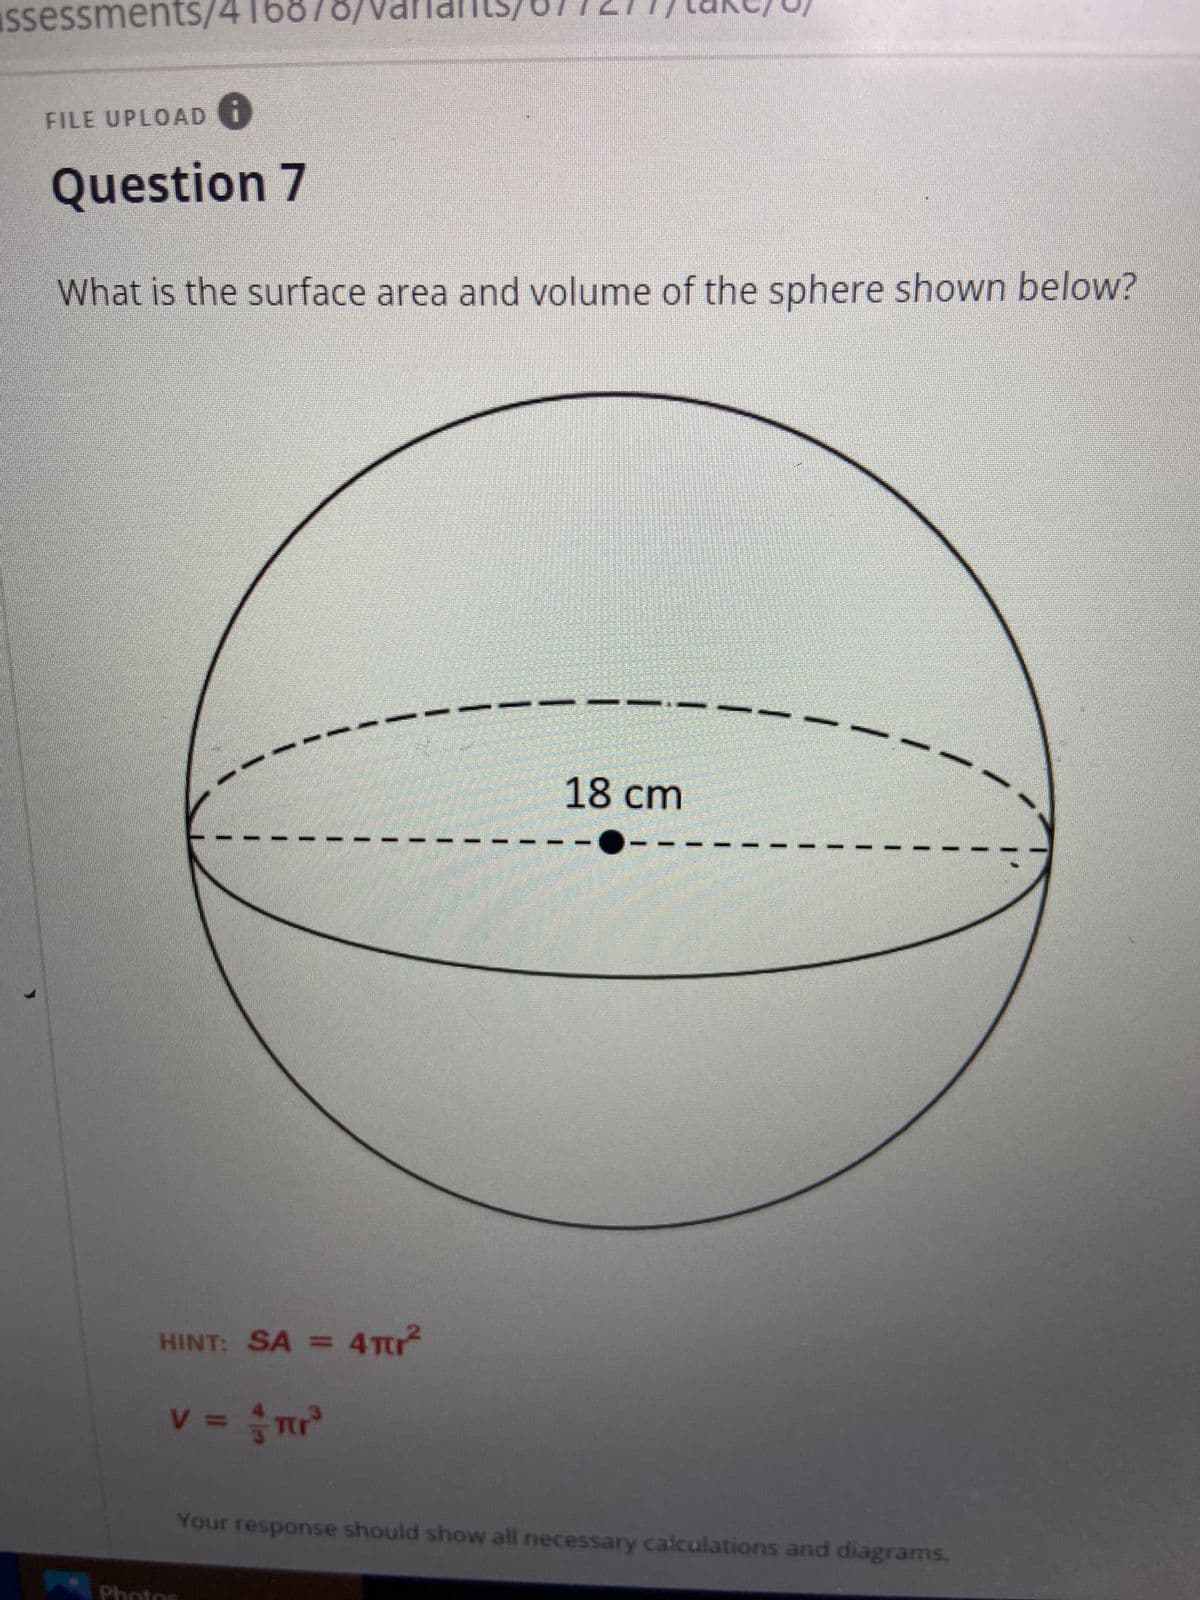 **Topic: Surface Area and Volume Calculation of a Sphere**

**Question 7:**
What is the surface area and volume of the sphere shown below?

*Diagram Description:*
The diagram shows a sphere with a diameter of 18 cm. The diameter is indicated by a horizontal dashed line passing through the center of the sphere.

**Hint:**
- Surface Area (SA) of a sphere is given by the formula: \( SA = 4\pi r^2 \)
- Volume (V) of a sphere is given by the formula: \(\displaystyle V = \frac{4}{3}\pi r^3 \)

Here, \( r \) is the radius of the sphere. Since the diameter of the sphere is 18 cm, the radius \( r \) is half of the diameter.
That is, \( r = \frac{18 \text{ cm}}{2} = 9 \text{ cm} \).

To find the surface area and volume, substitute \( r = 9 \text{ cm} \) into the formulas.

- **Surface Area Calculation:**
  \[
  SA = 4\pi r^2
  \]
  \[
  SA = 4\pi (9 \text{ cm})^2
  \]
  \[
  SA = 4\pi (81 \text{ cm}^2)
  \]
  \[
  SA = 324\pi \text{ cm}^2
  \]

- **Volume Calculation:**
  \[
  V = \frac{4}{3}\pi r^3
  \]
  \[
  V = \frac{4}{3}\pi (9 \text{ cm})^3
  \]
  \[
  V = \frac{4}{3}\pi (729 \text{ cm}^3)
  \]
  \[
  V = \frac{2916\pi}{3} \text{ cm}^3
  \]
  \[
  V = 972\pi \text{ cm}^3
  \]

**Your response should show all necessary calculations and diagrams.**